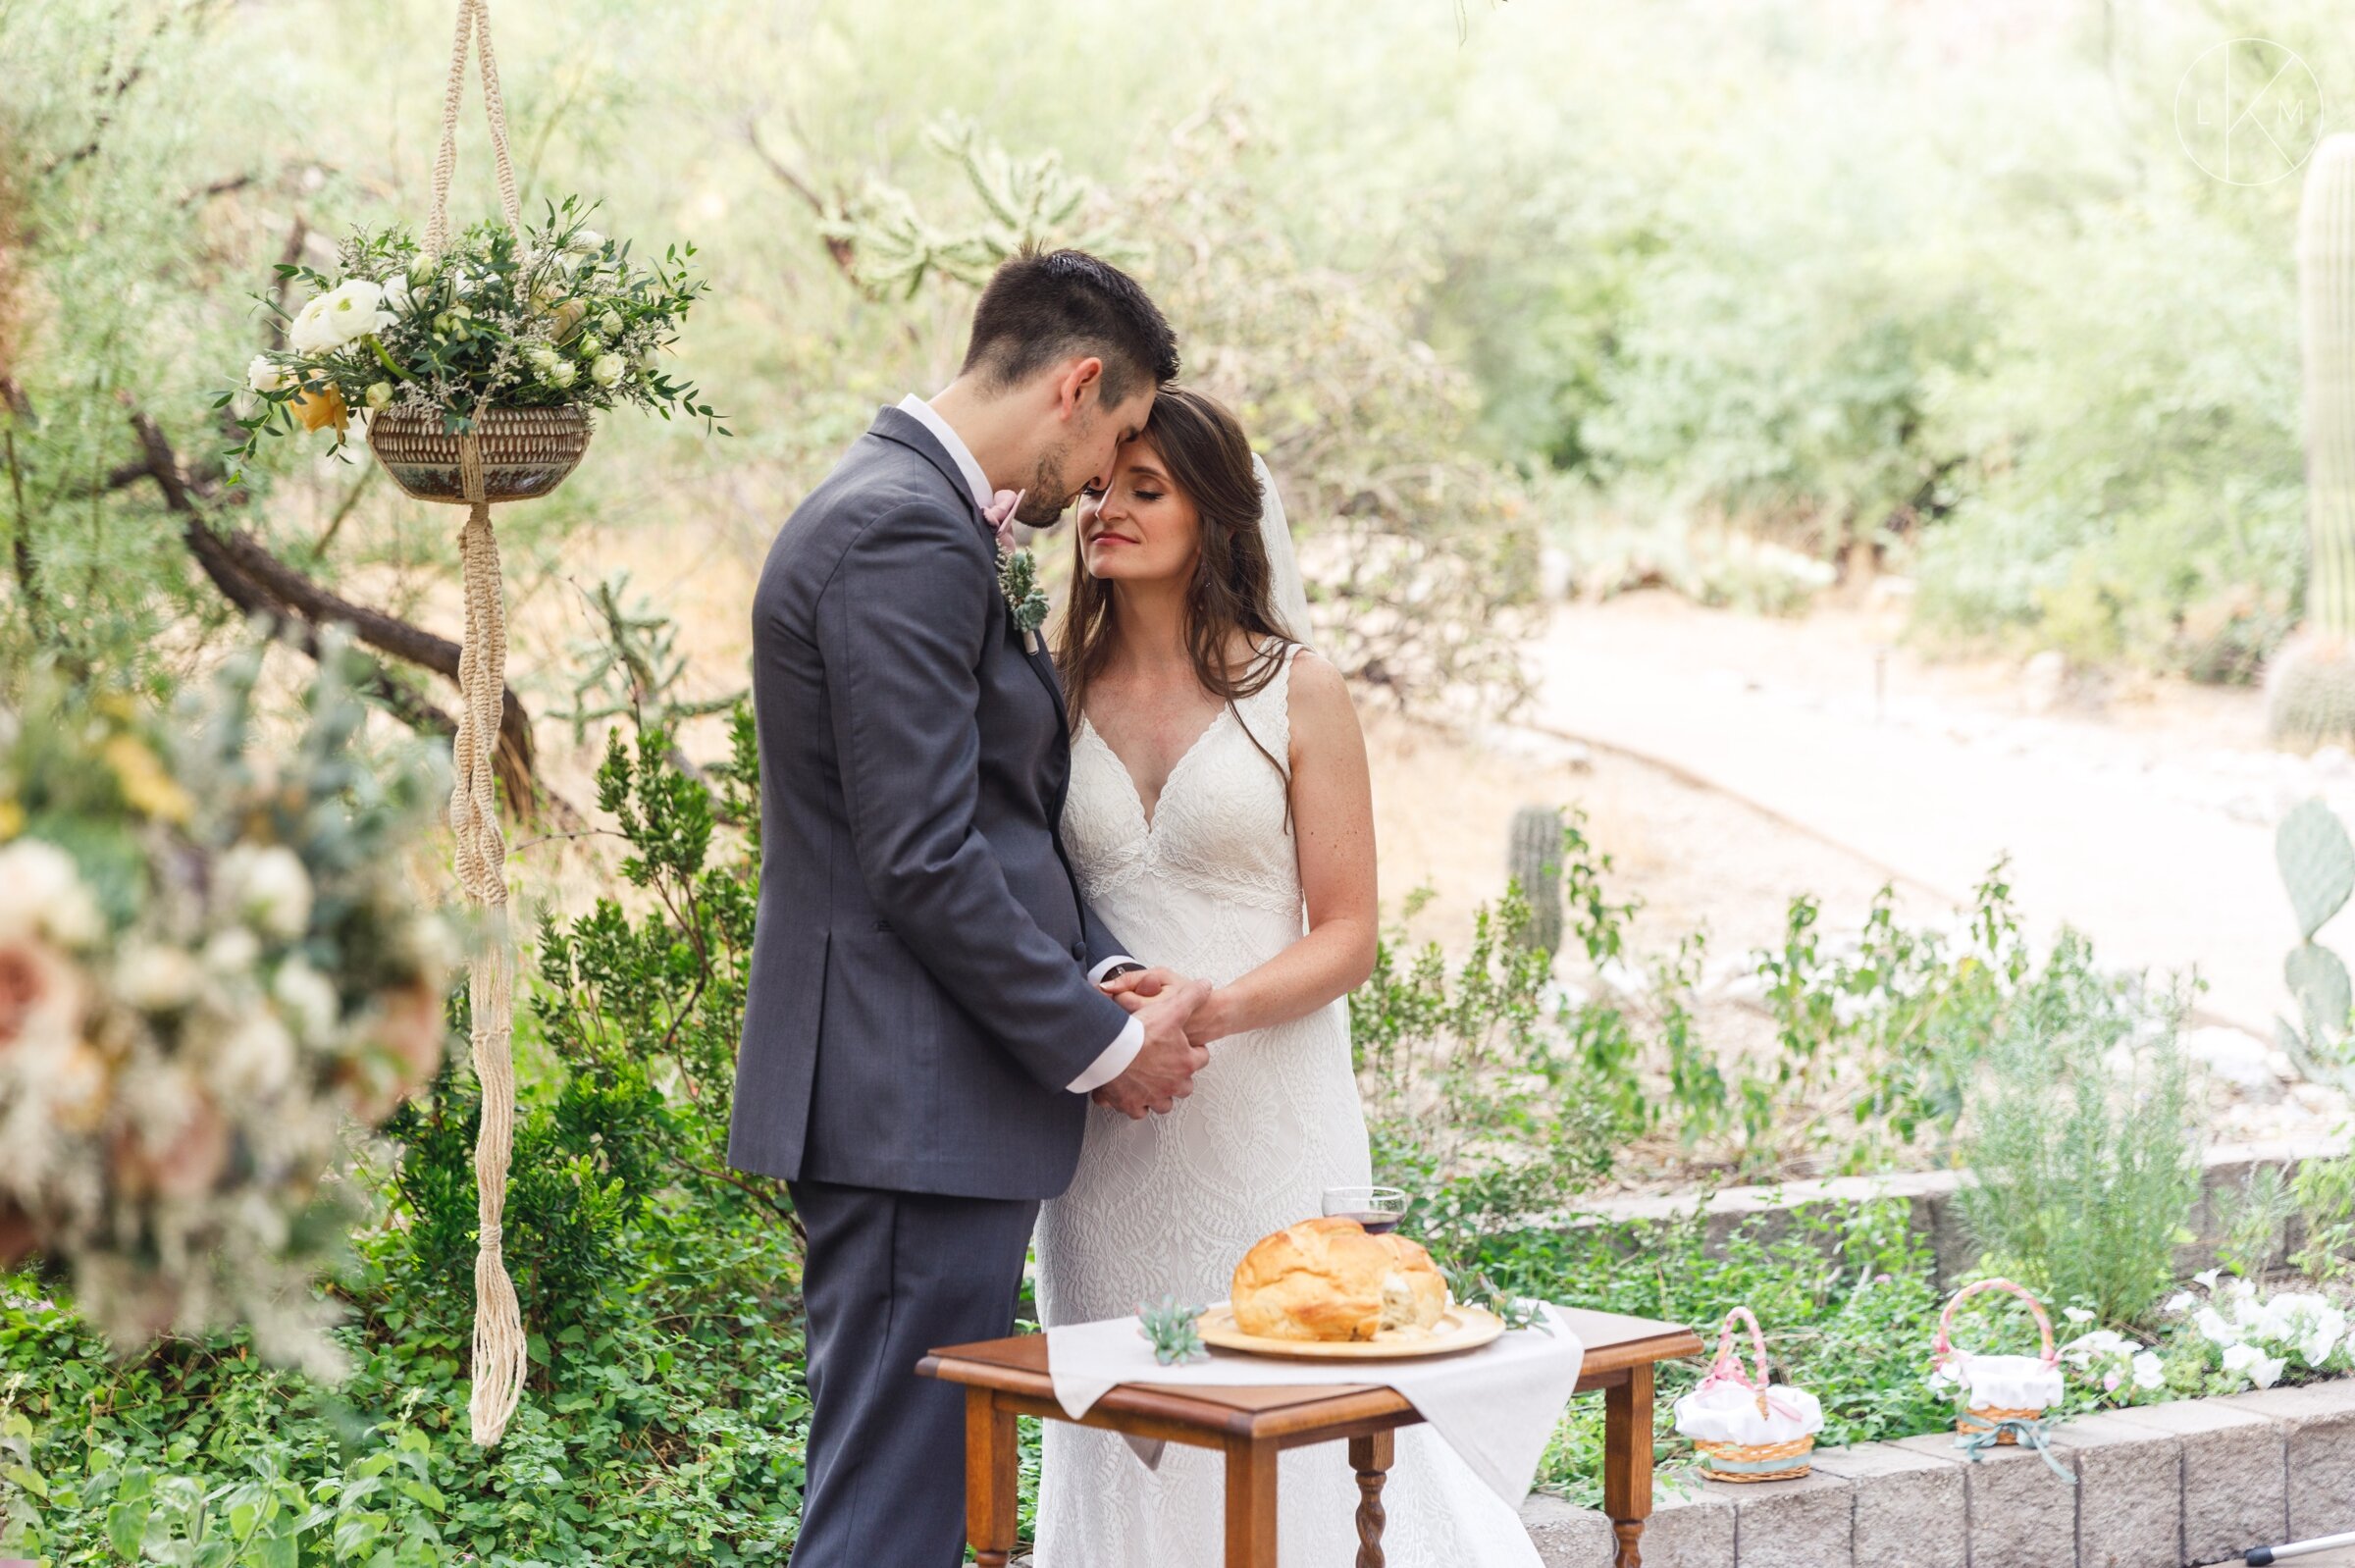 20_09_12_CLUTTER_LOWES_VENTANA_CANYON_WEDDING-PICTURES_laura-k-moore-photography 30.jpg